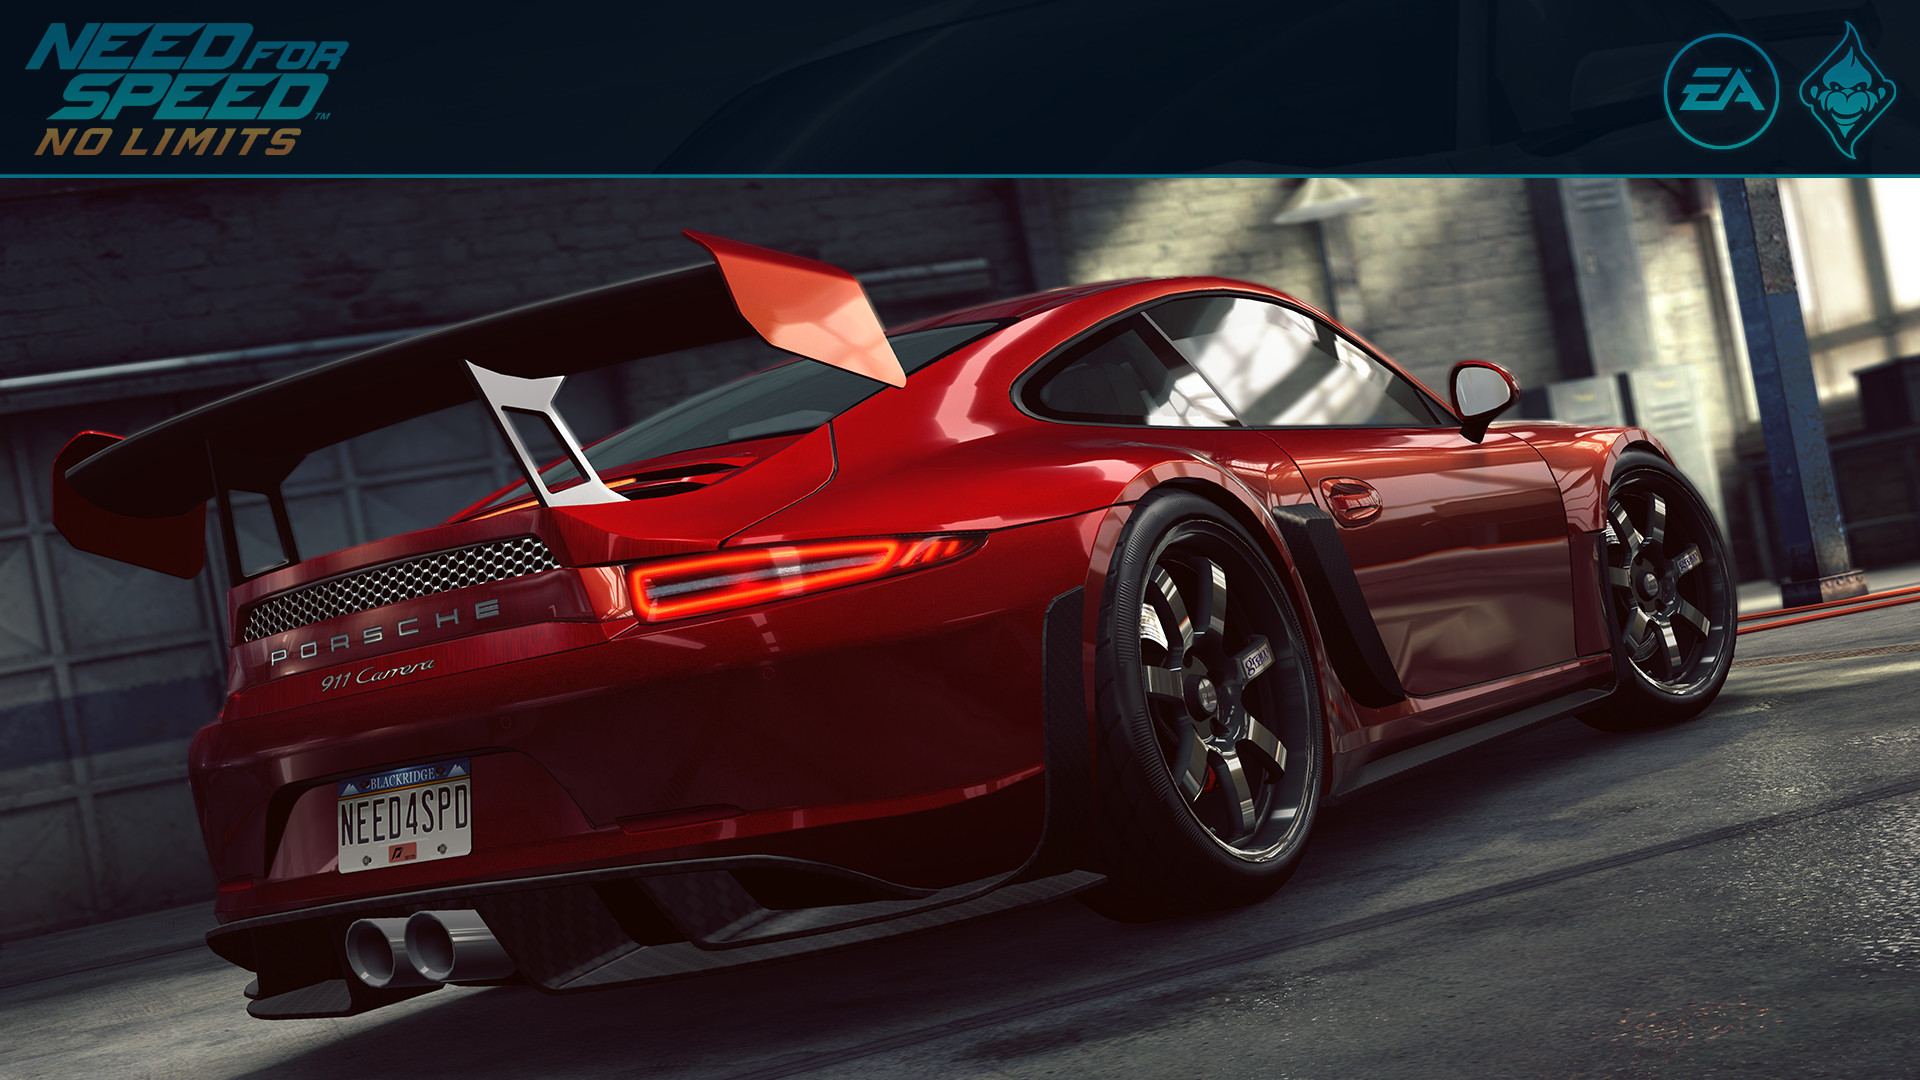 General 1920x1080 Need for Speed: No Limits video games car vehicle garage tuning Need for Speed Porsche 911 Porsche 991